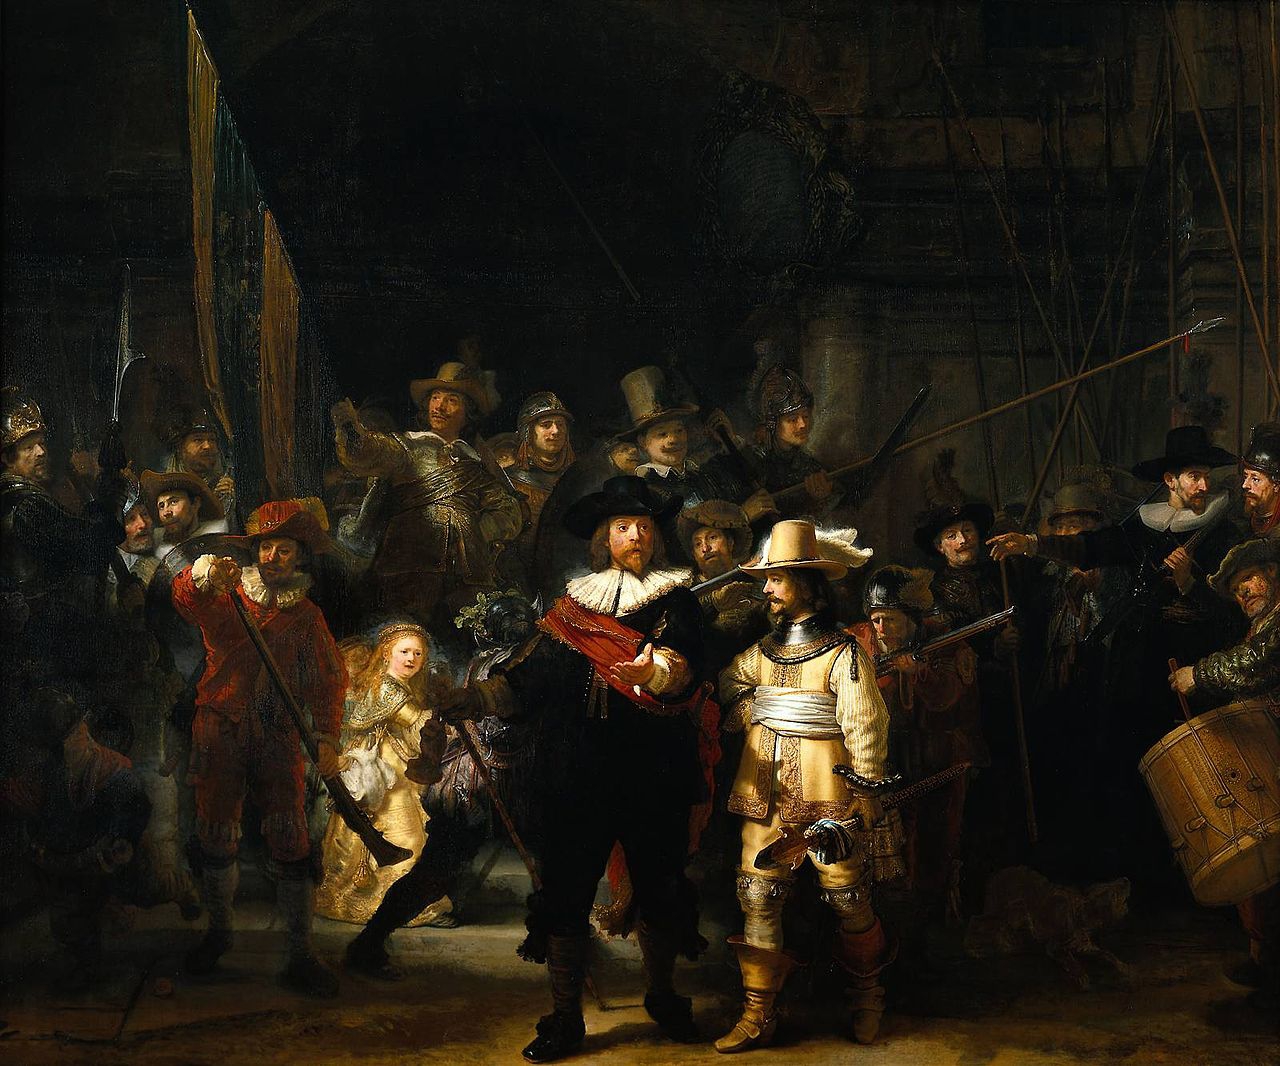 https://cont.ws/uploads/pic/2016/4/the_nightwatch_by_rembrandt%20(2).jpg